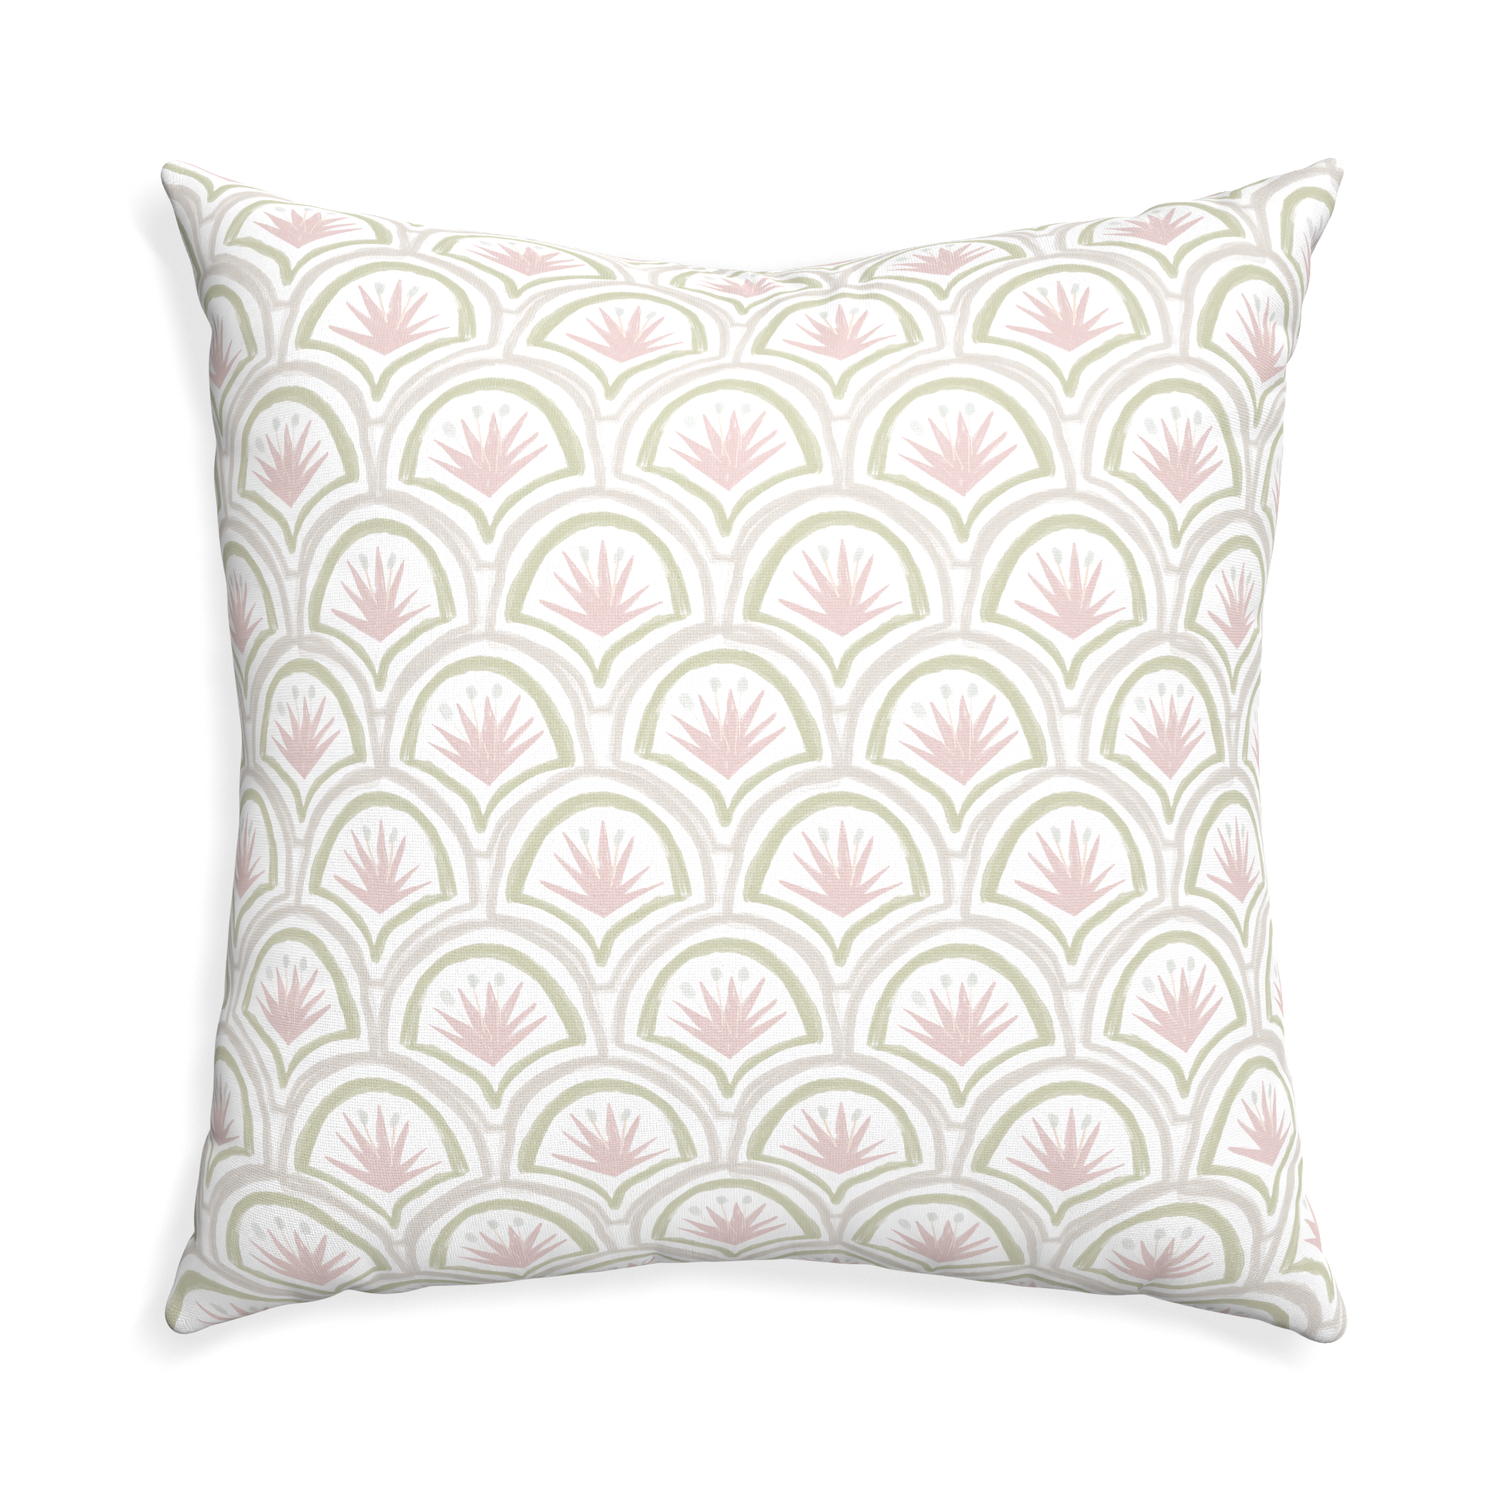 Euro-sham thatcher rose custom pillow with none on white background